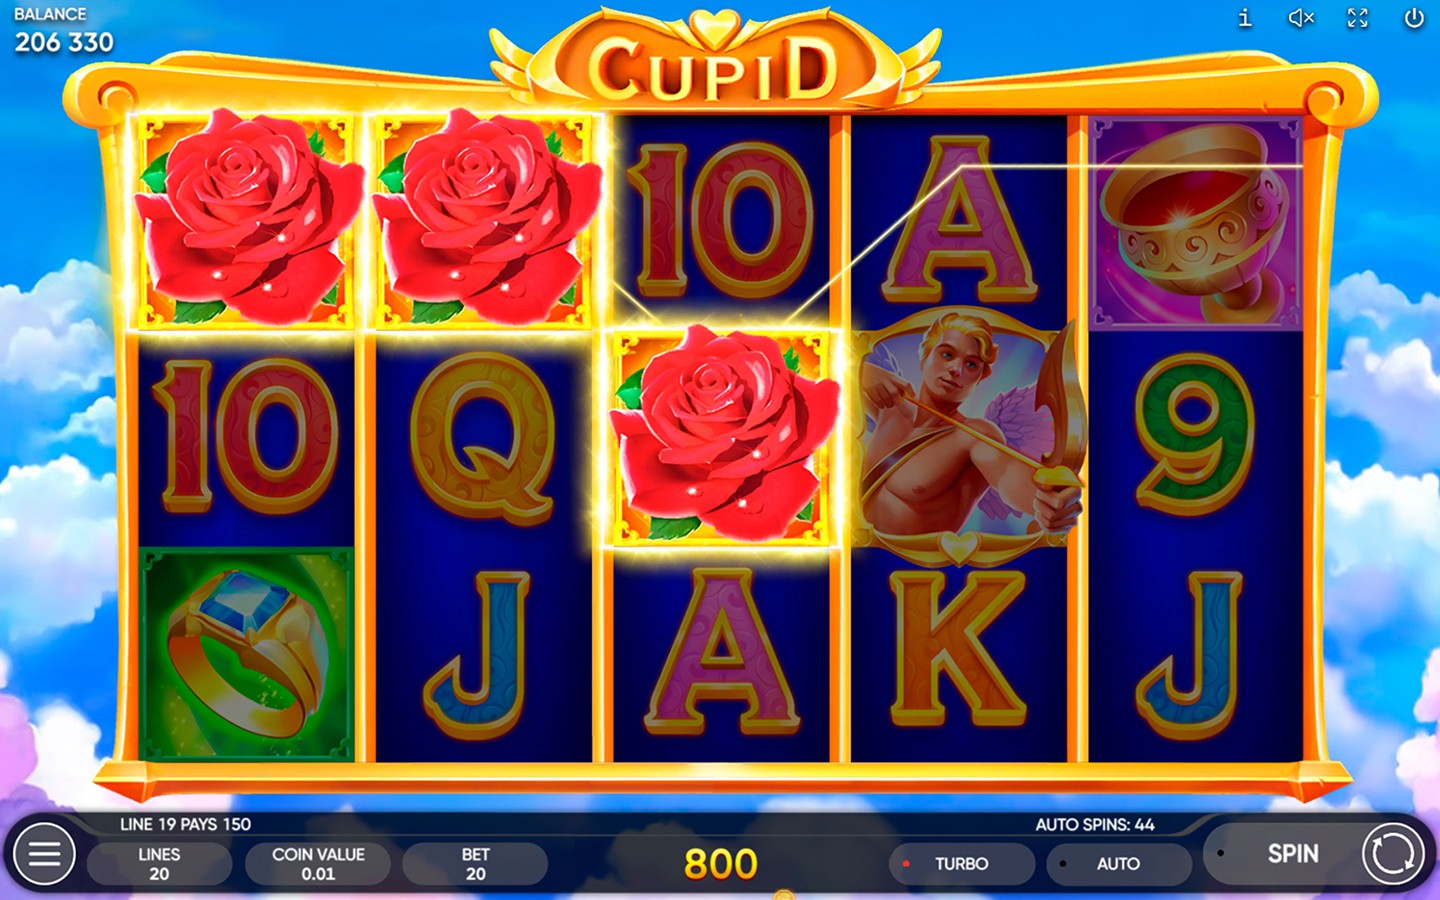 CASINO GAME DEVELOPERS | Play Cupid slot now!